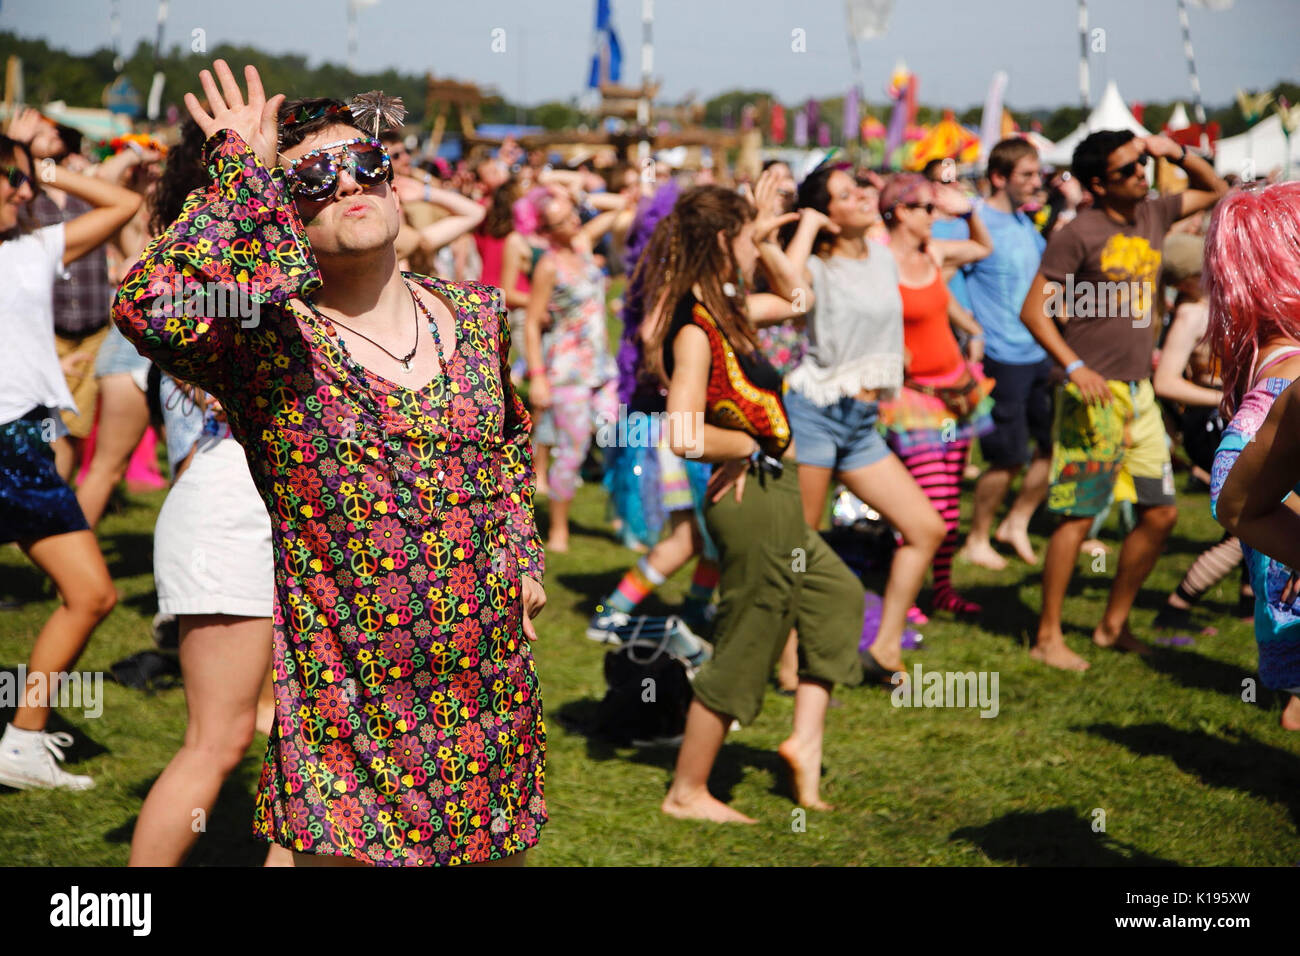 Northampton, UK. 25th August, 2017. Festival goers join together for a giant Charleston dance workshop. The alternative festival famed for authentic music, crazy fancy dress and enthusiastic energy continues today under sunny skies on the Kelmarsh Estate. Credit: Wayne Farrell/Alamy Live News Stock Photo